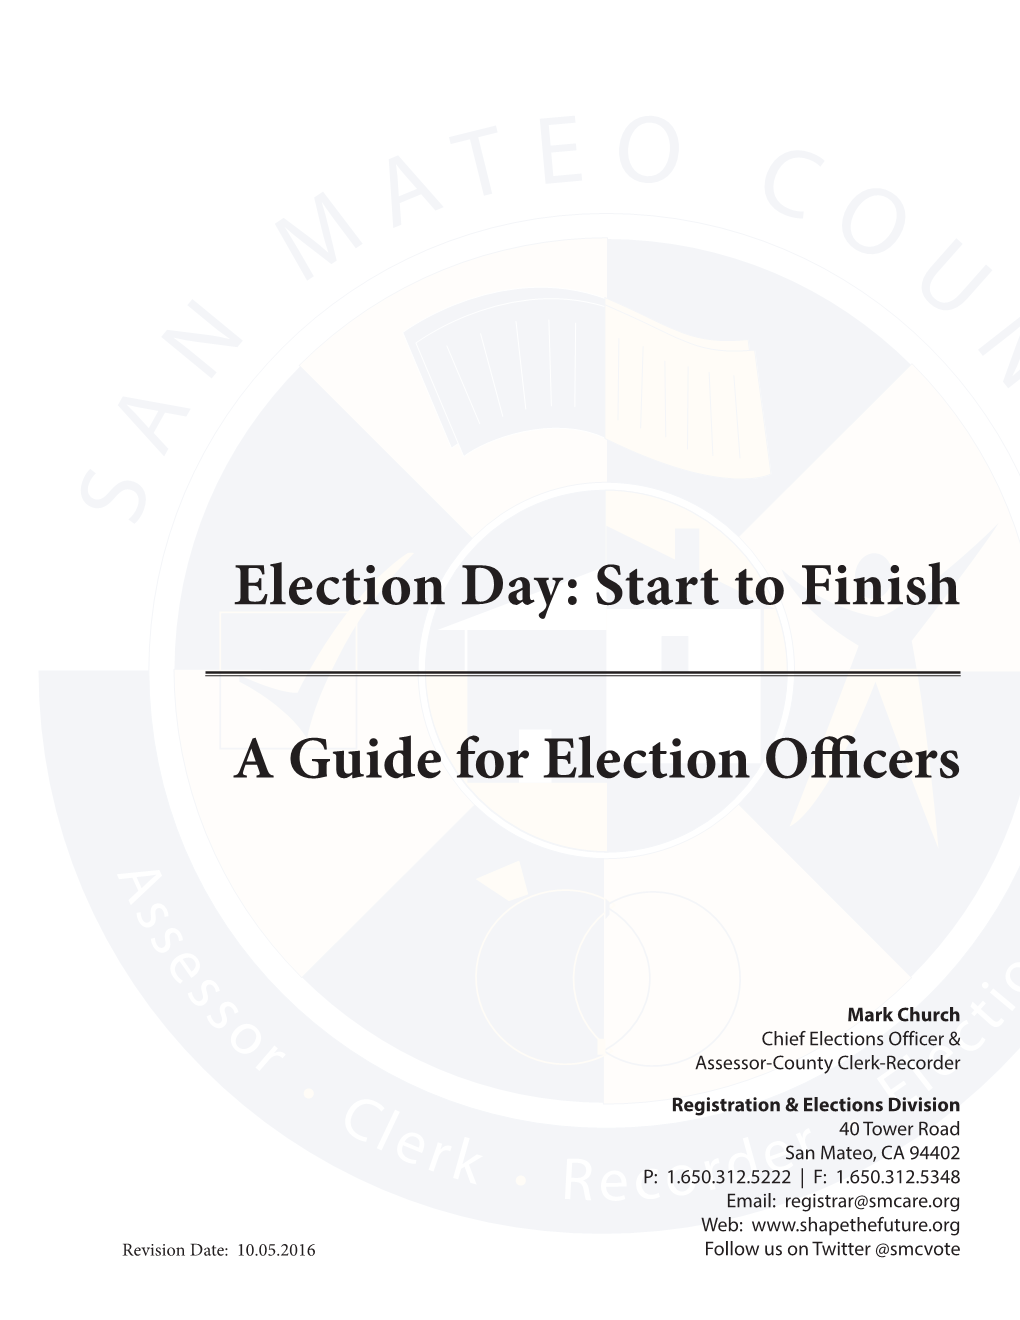 Election Day: Start to Finish